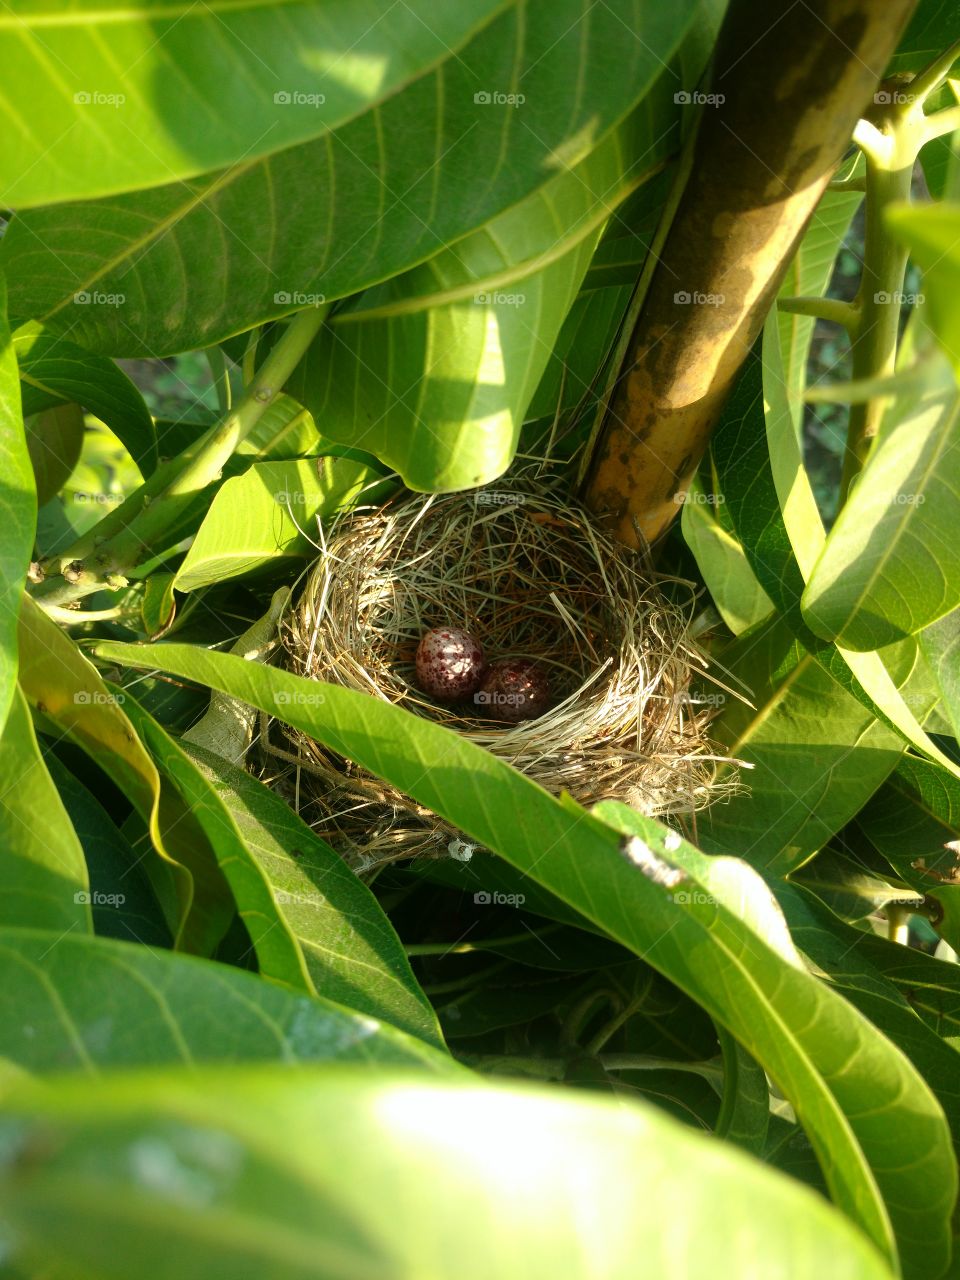 NEST. Bird's Beautiful Nest On The Tree In My Farm, two little eggs too in it.